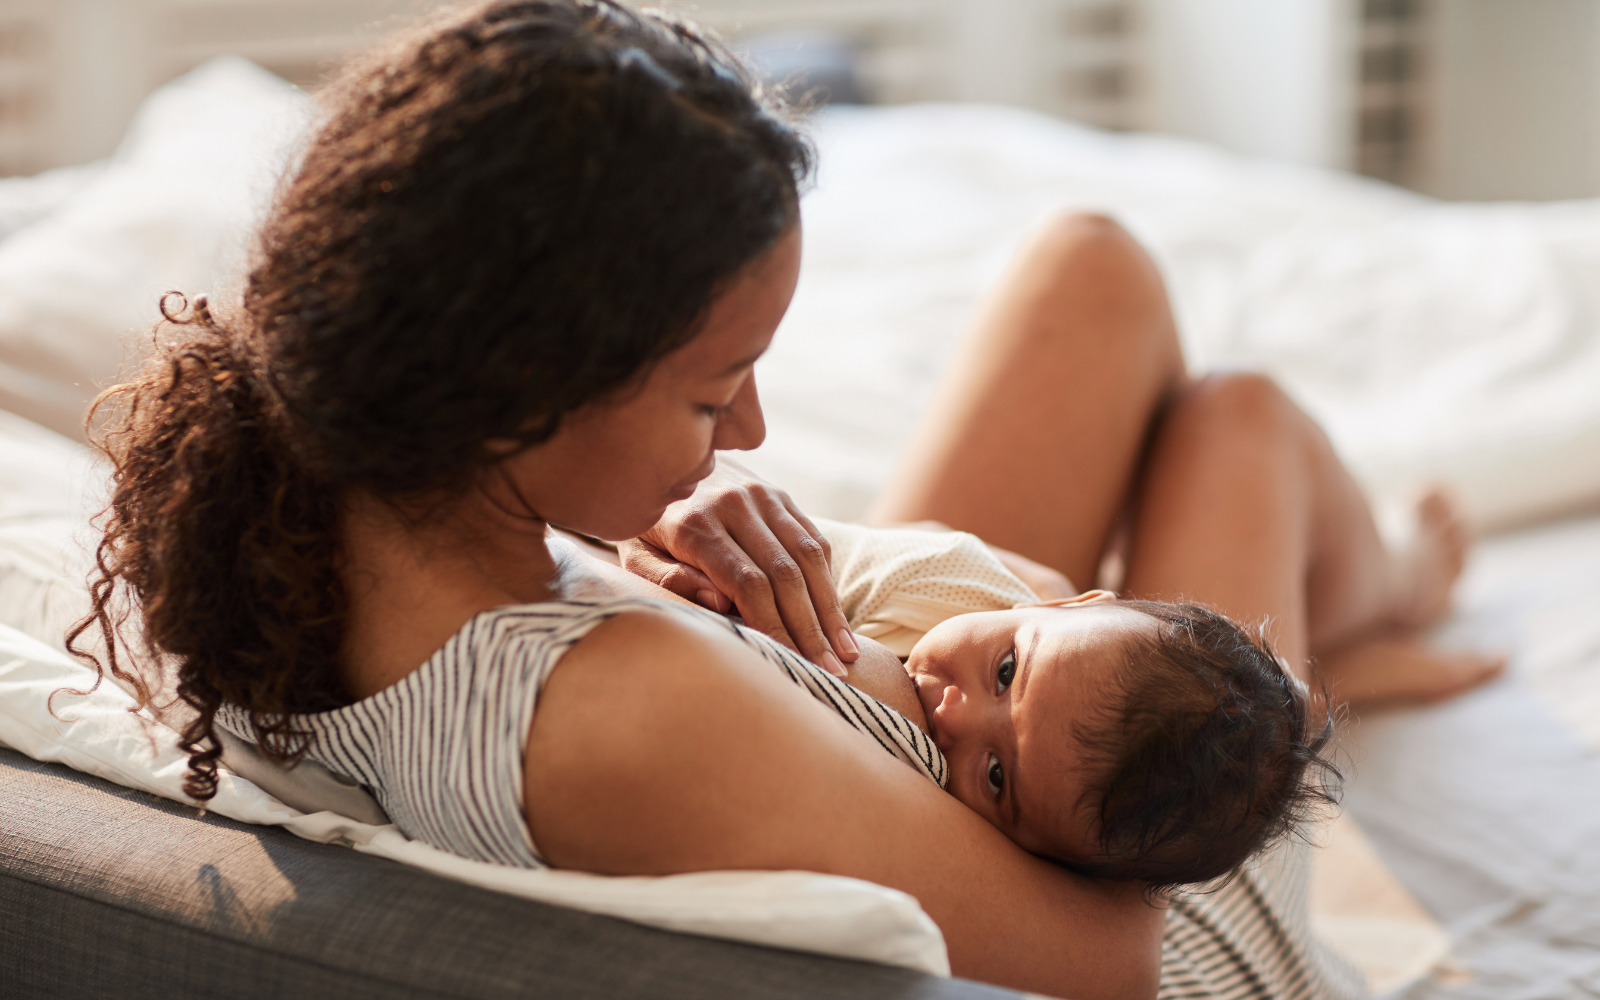 Does Breastfeeding Make You Tired? Tips to Keep Your Energy Up